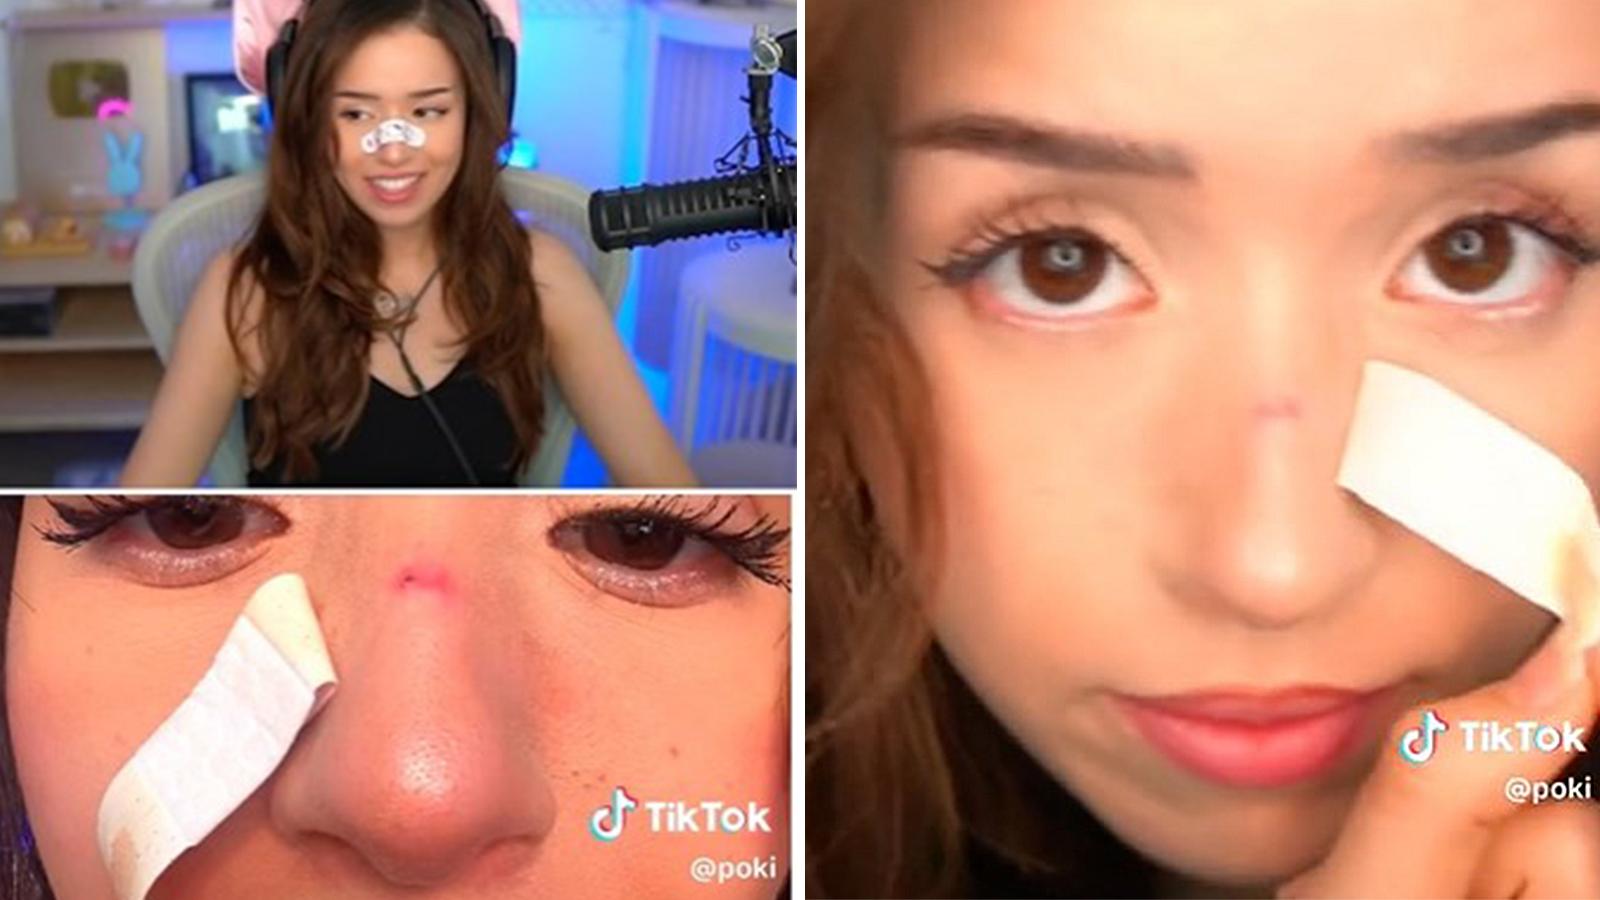 pokimane reveals nose injury after bloody laptop accident